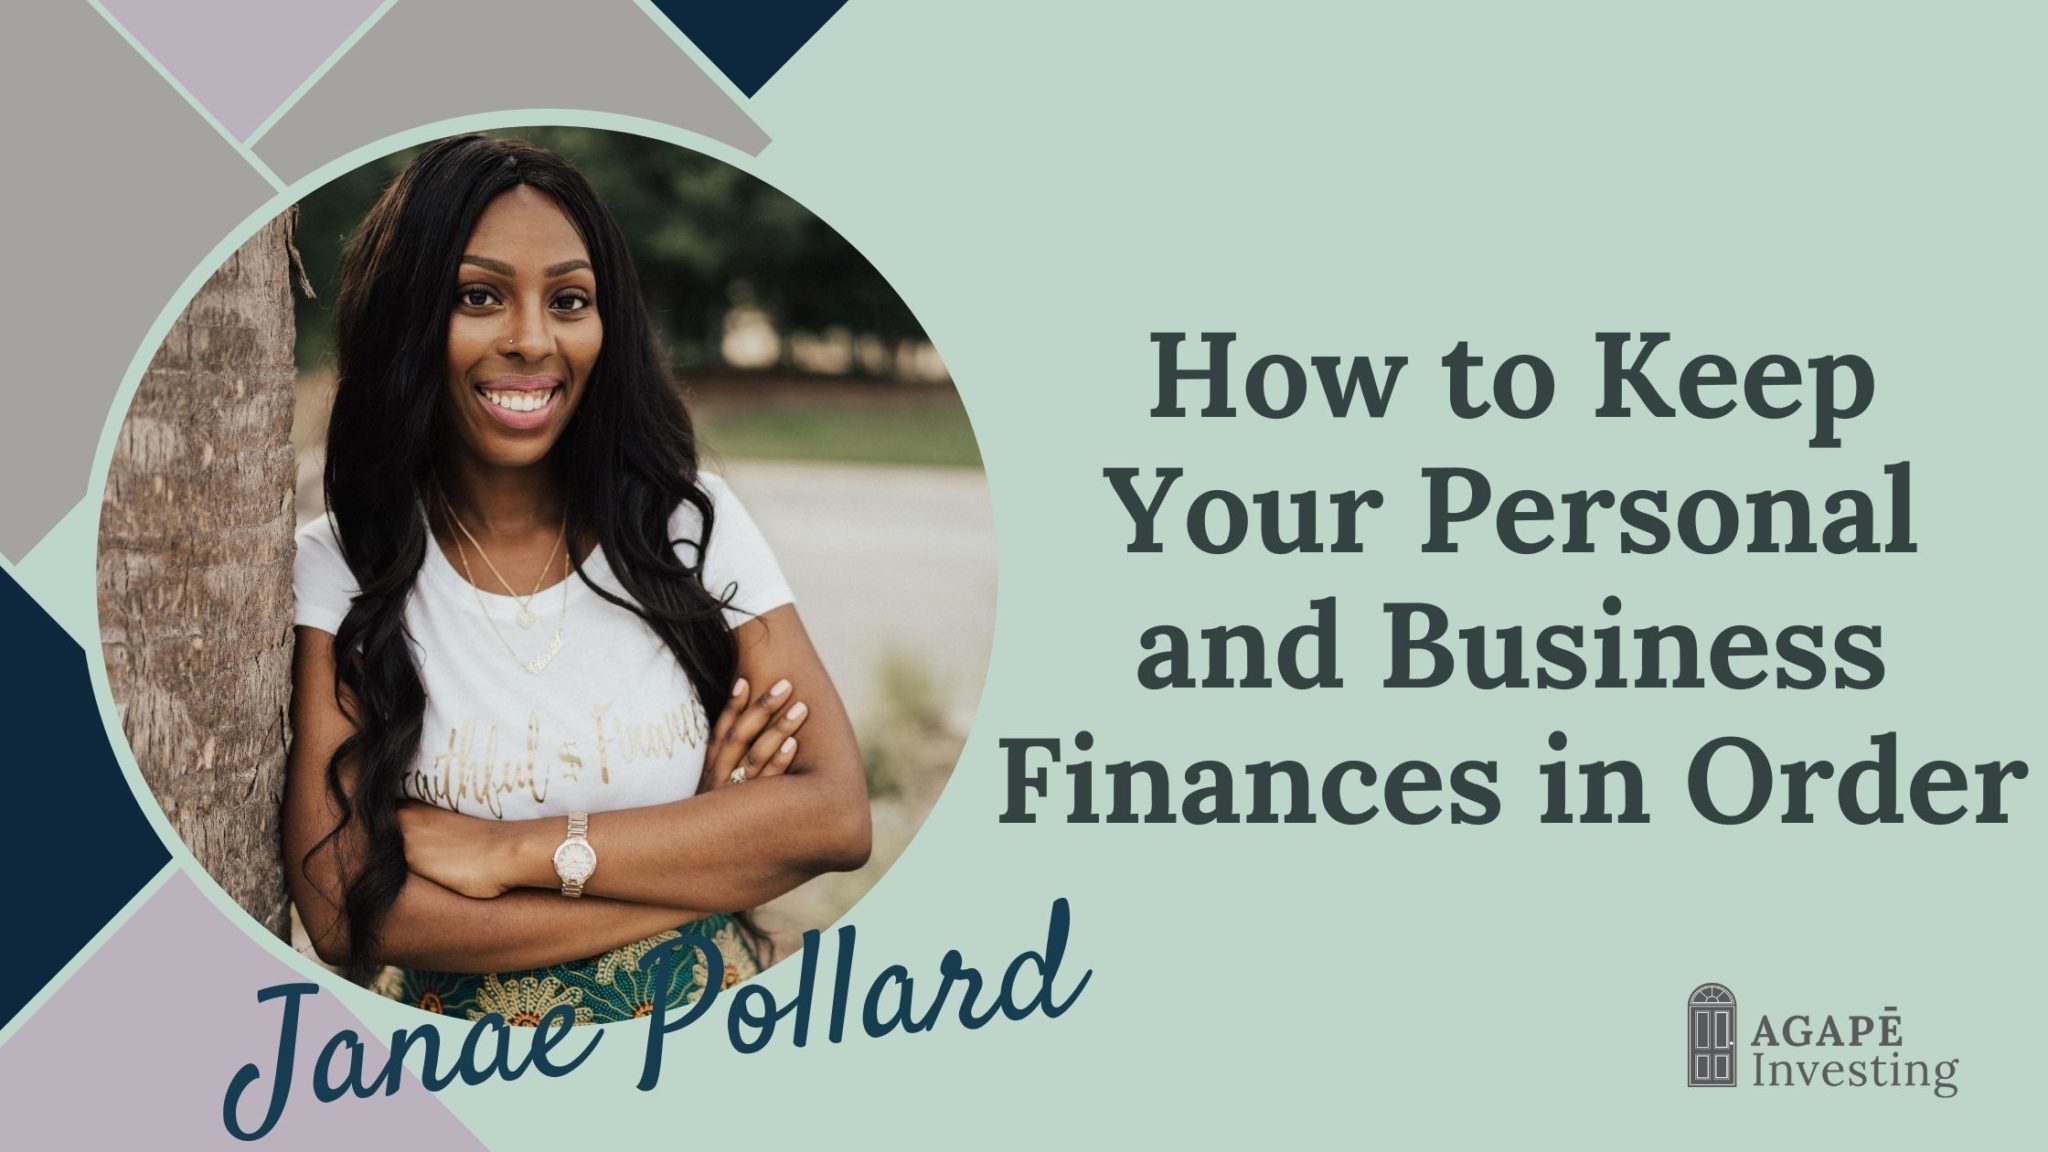 How to Keep Your Personal and Business Finances in Order - Janae Pollard